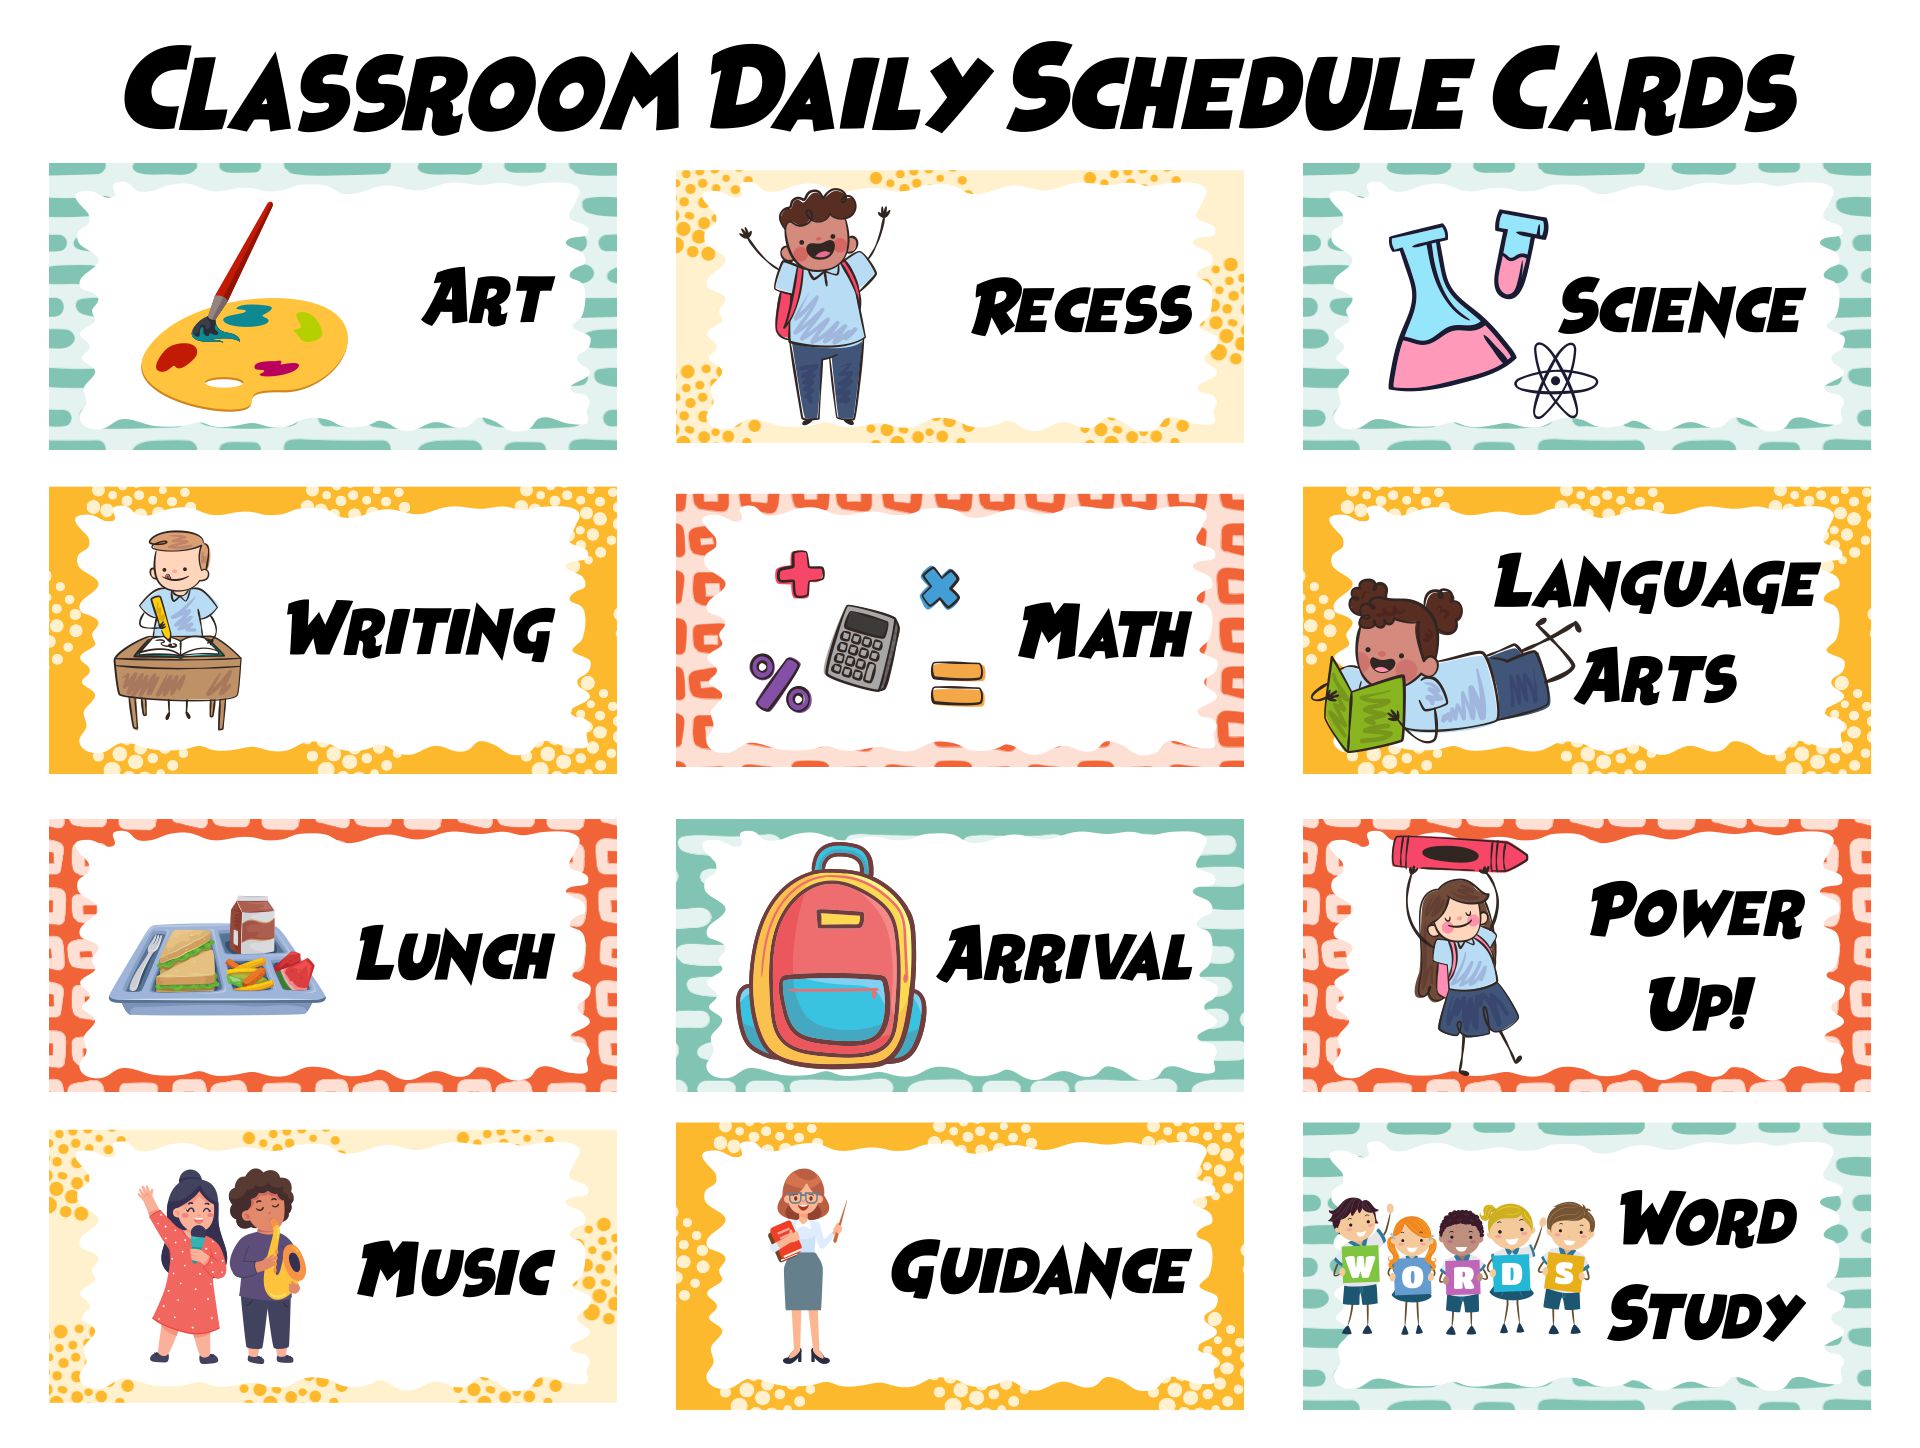 4-best-images-of-classroom-daily-schedule-printable-printable-classroom-schedule-cards